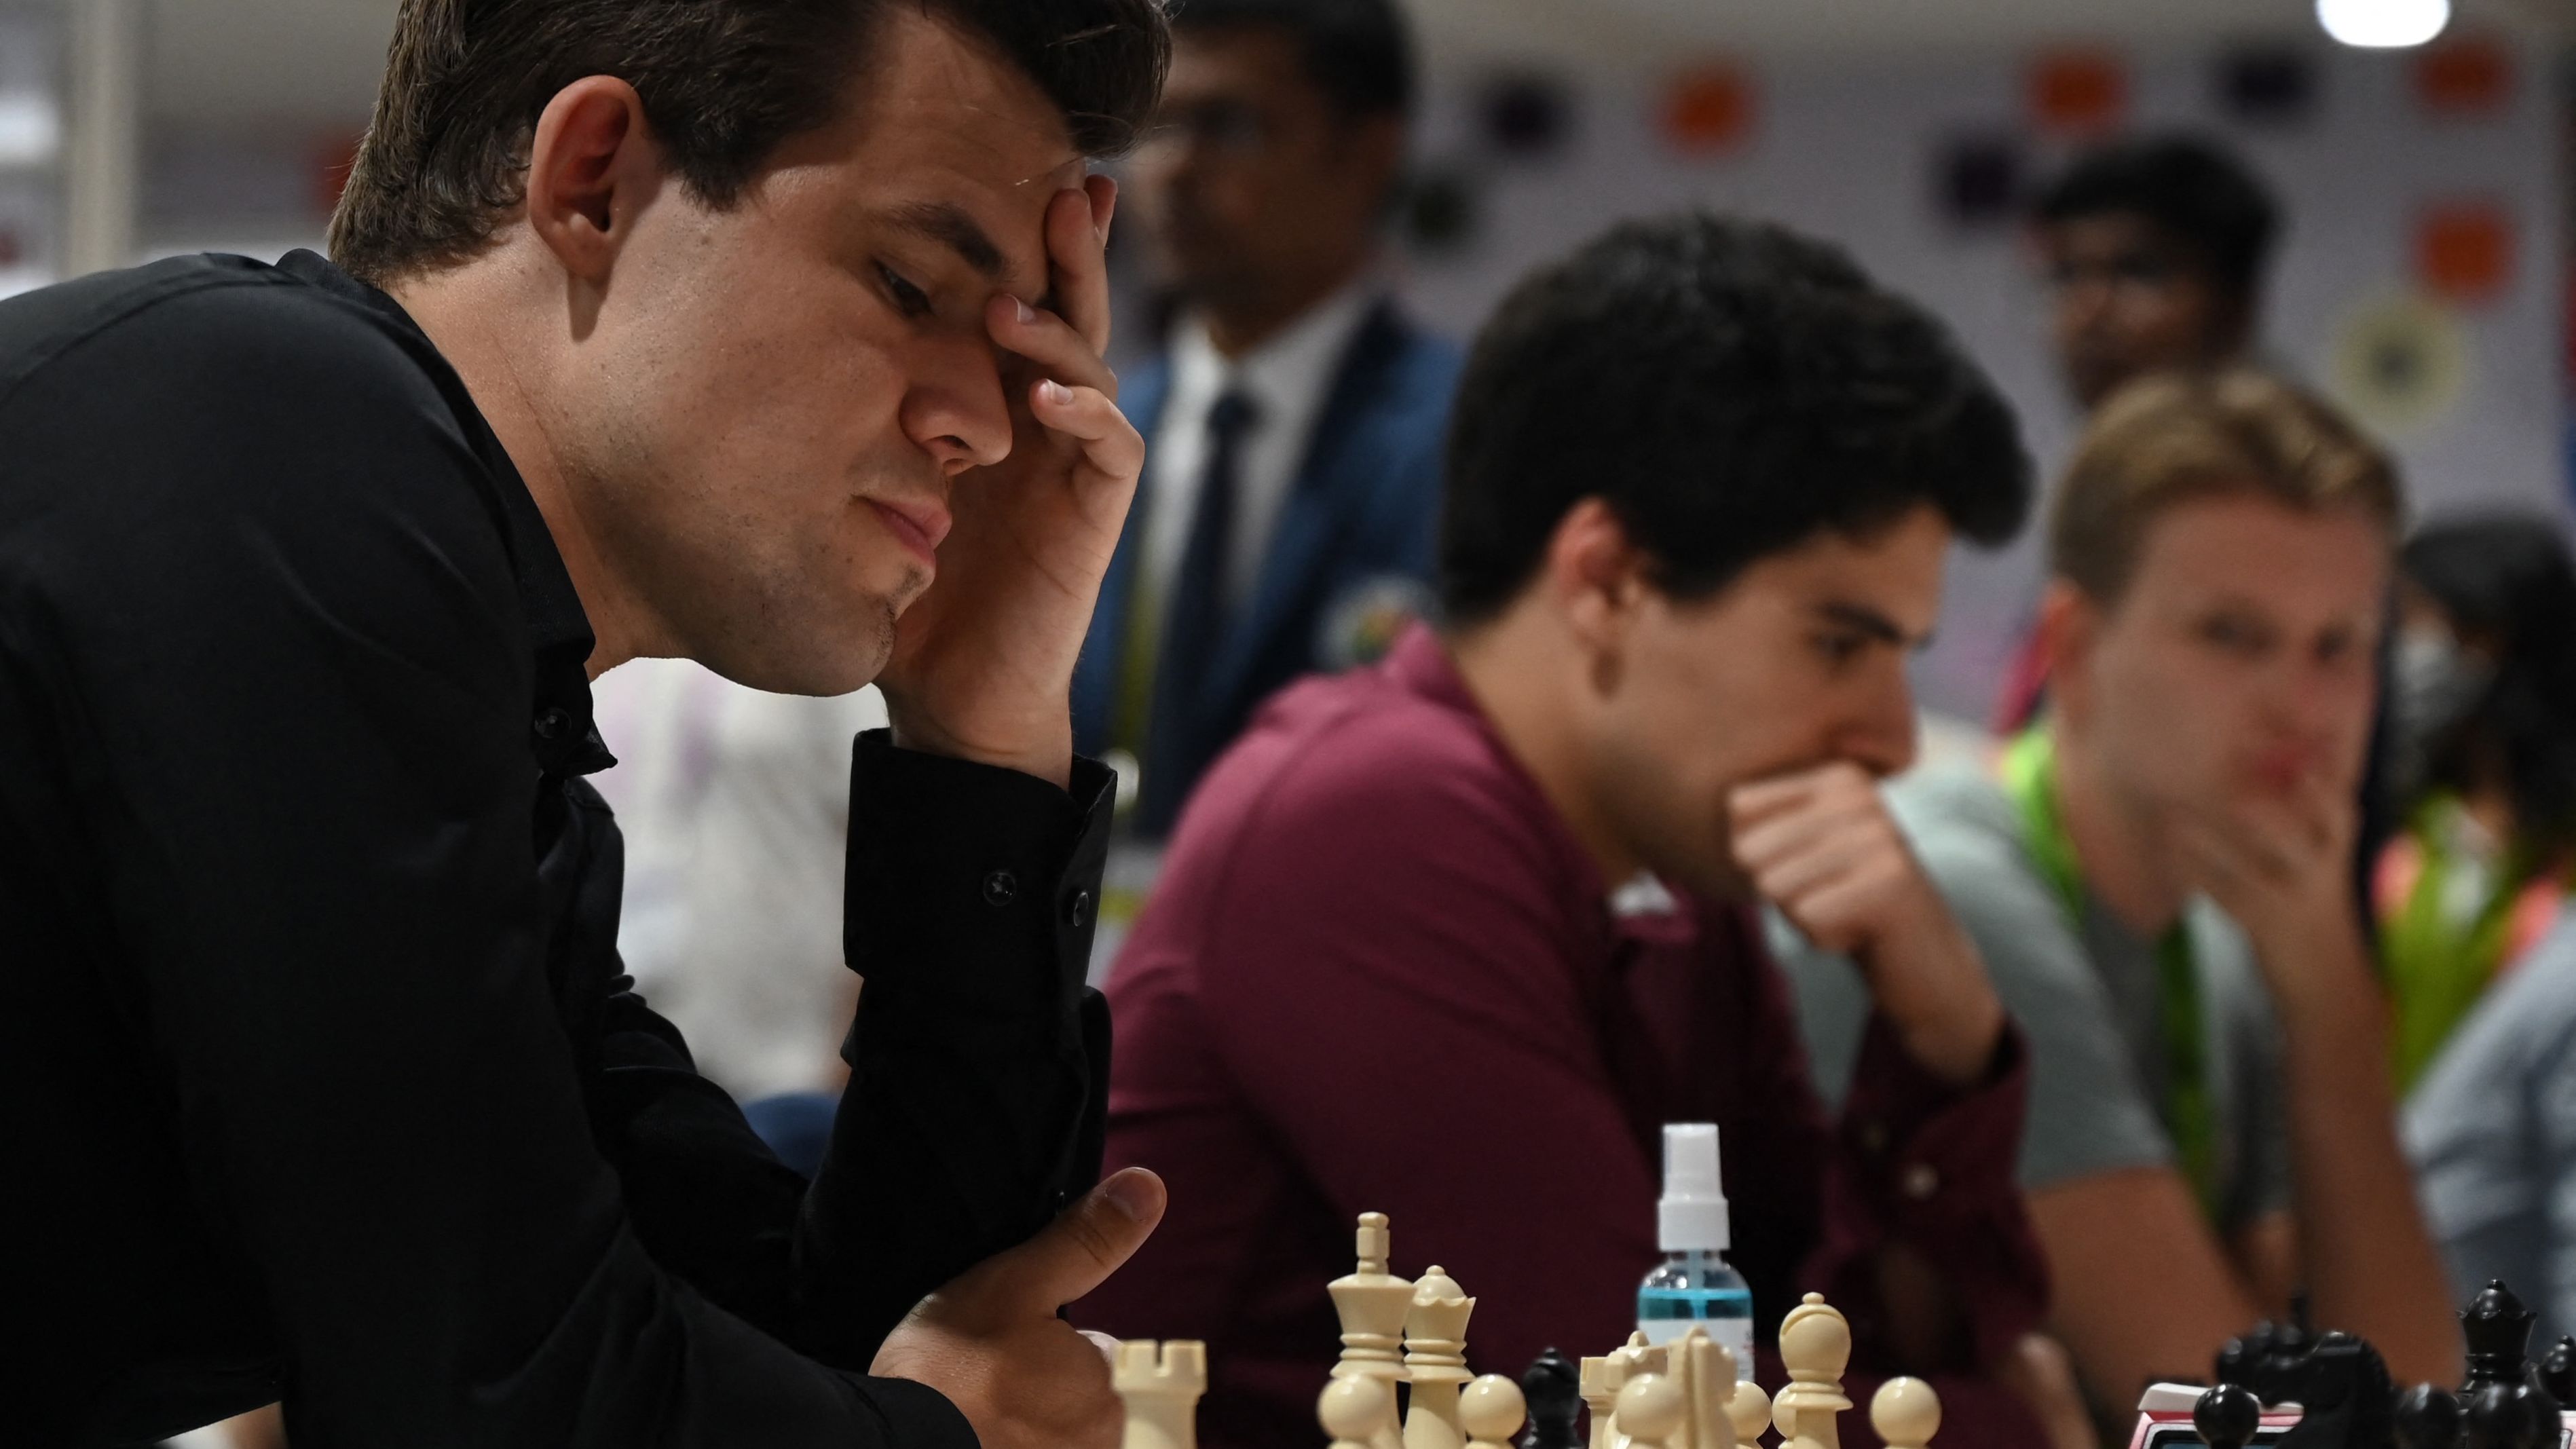 Carlsen mulls over a move during his round 8 game against the Slovakia team at the 44th Chess Olympiad.